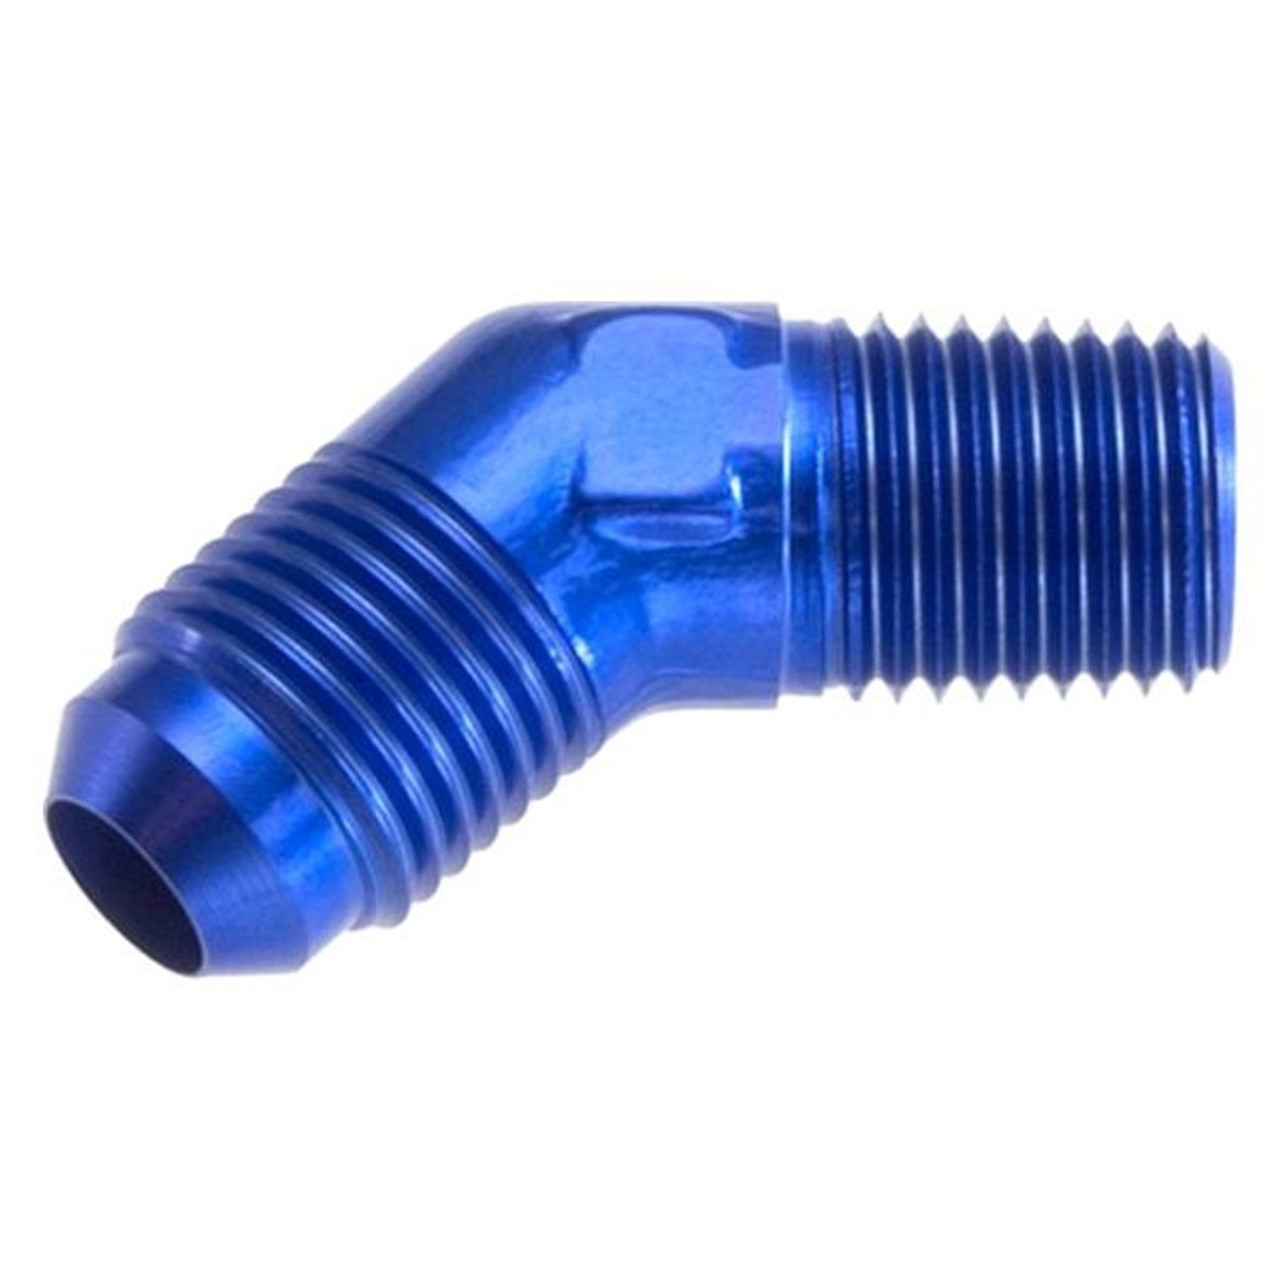 RHP823-06-04-1, AN to NPT Adapter  -06 45 degree male adapter to -04 (1/4")